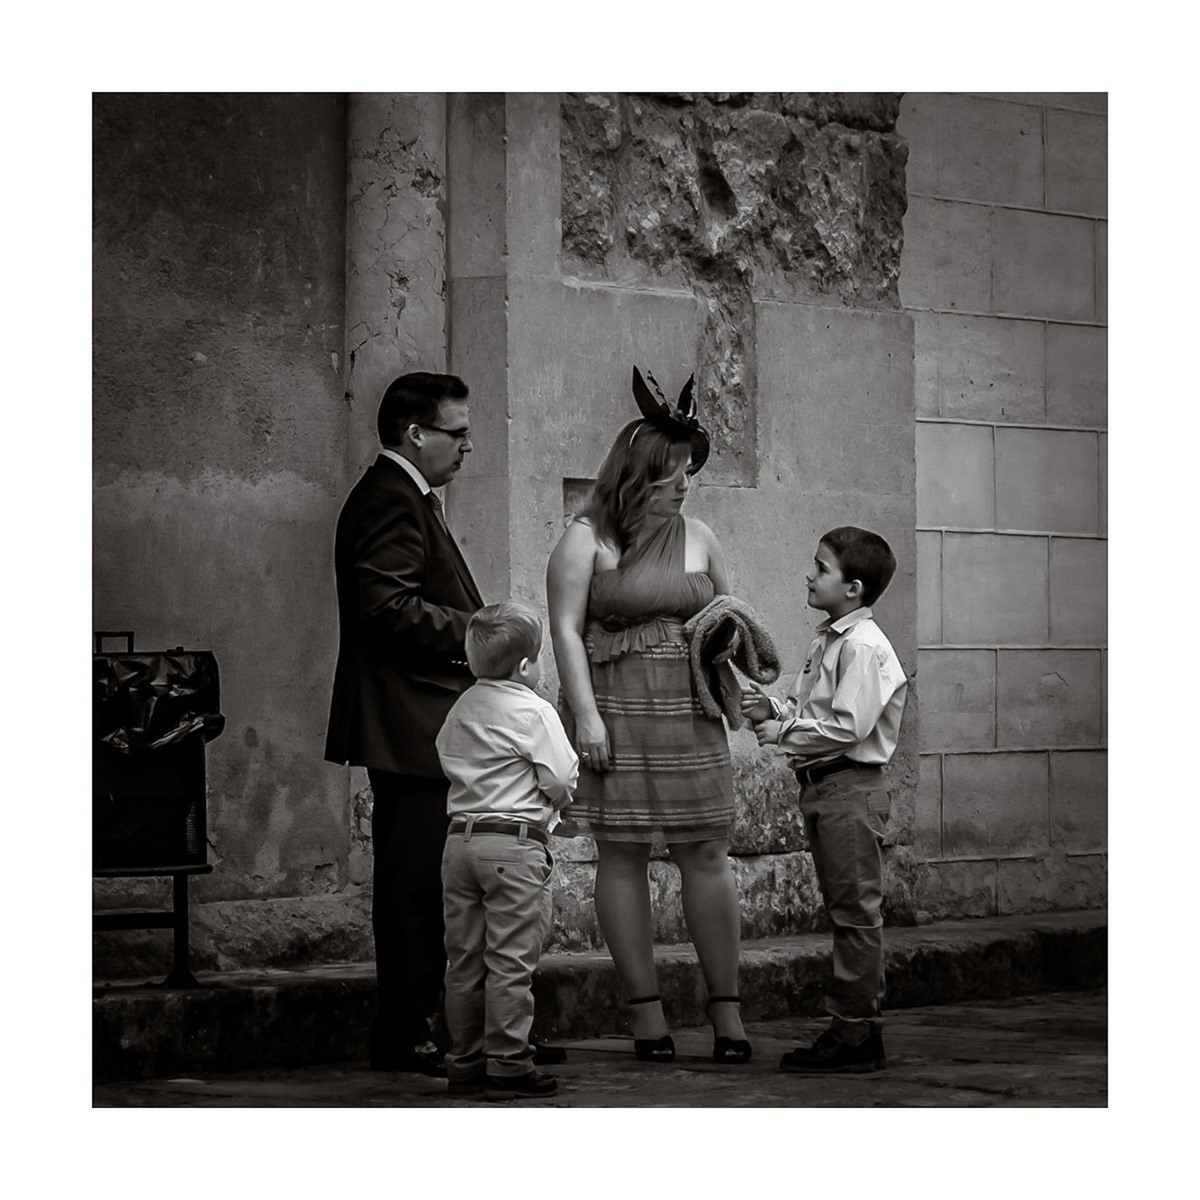 andalusia cordoba family spain b&w Black&white children old building old town people